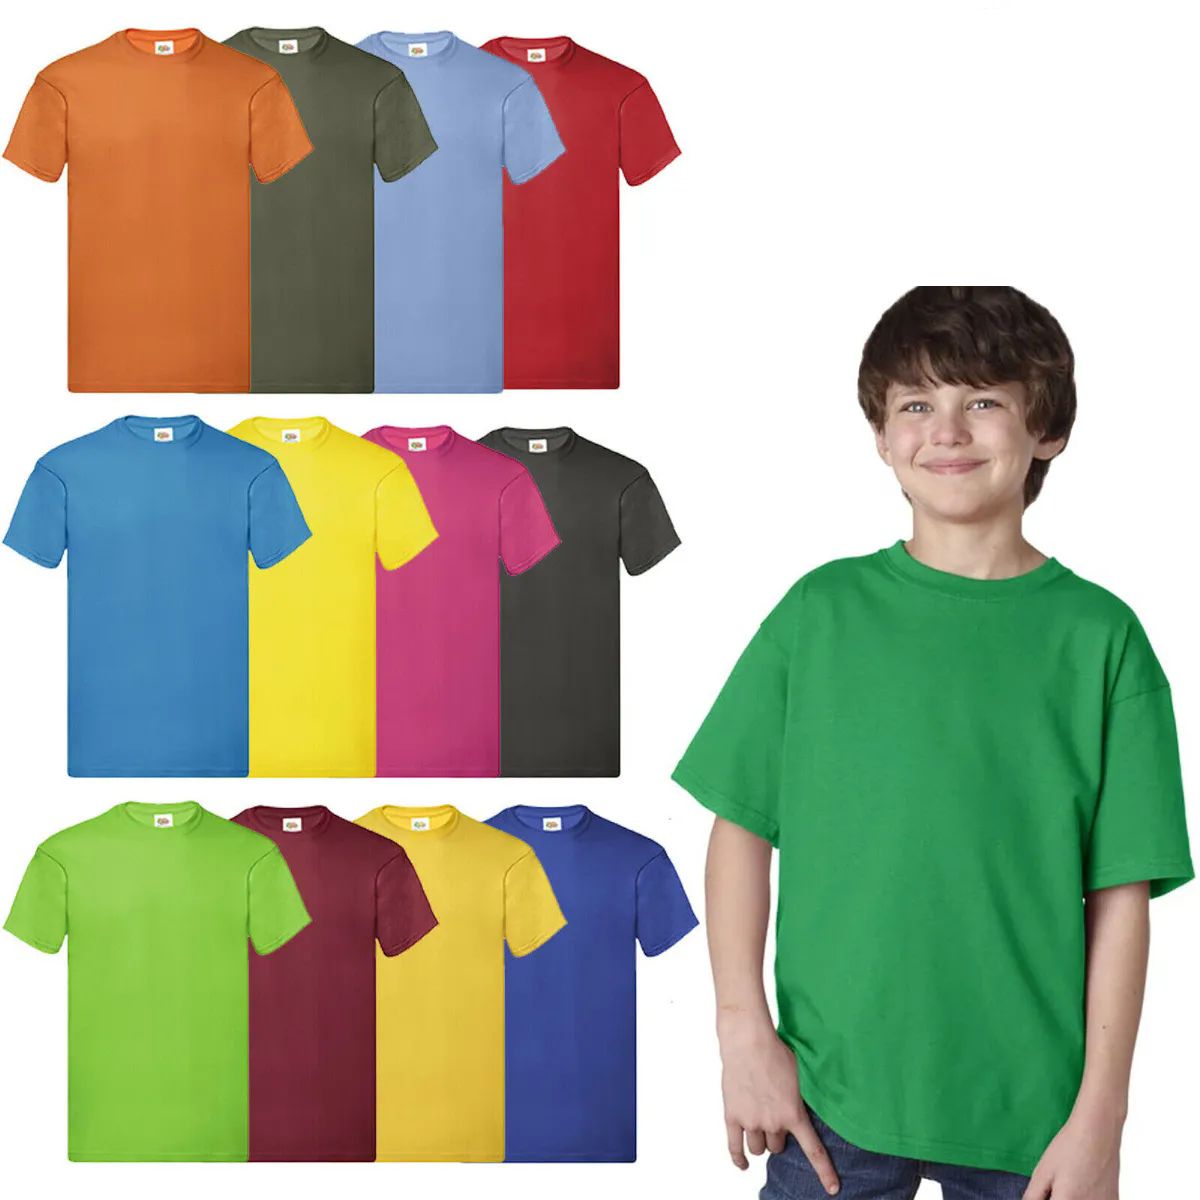 72 Pieces of Billionhats Kids Youth Cotton Assorted Colors T-Shirts Size Xsmall